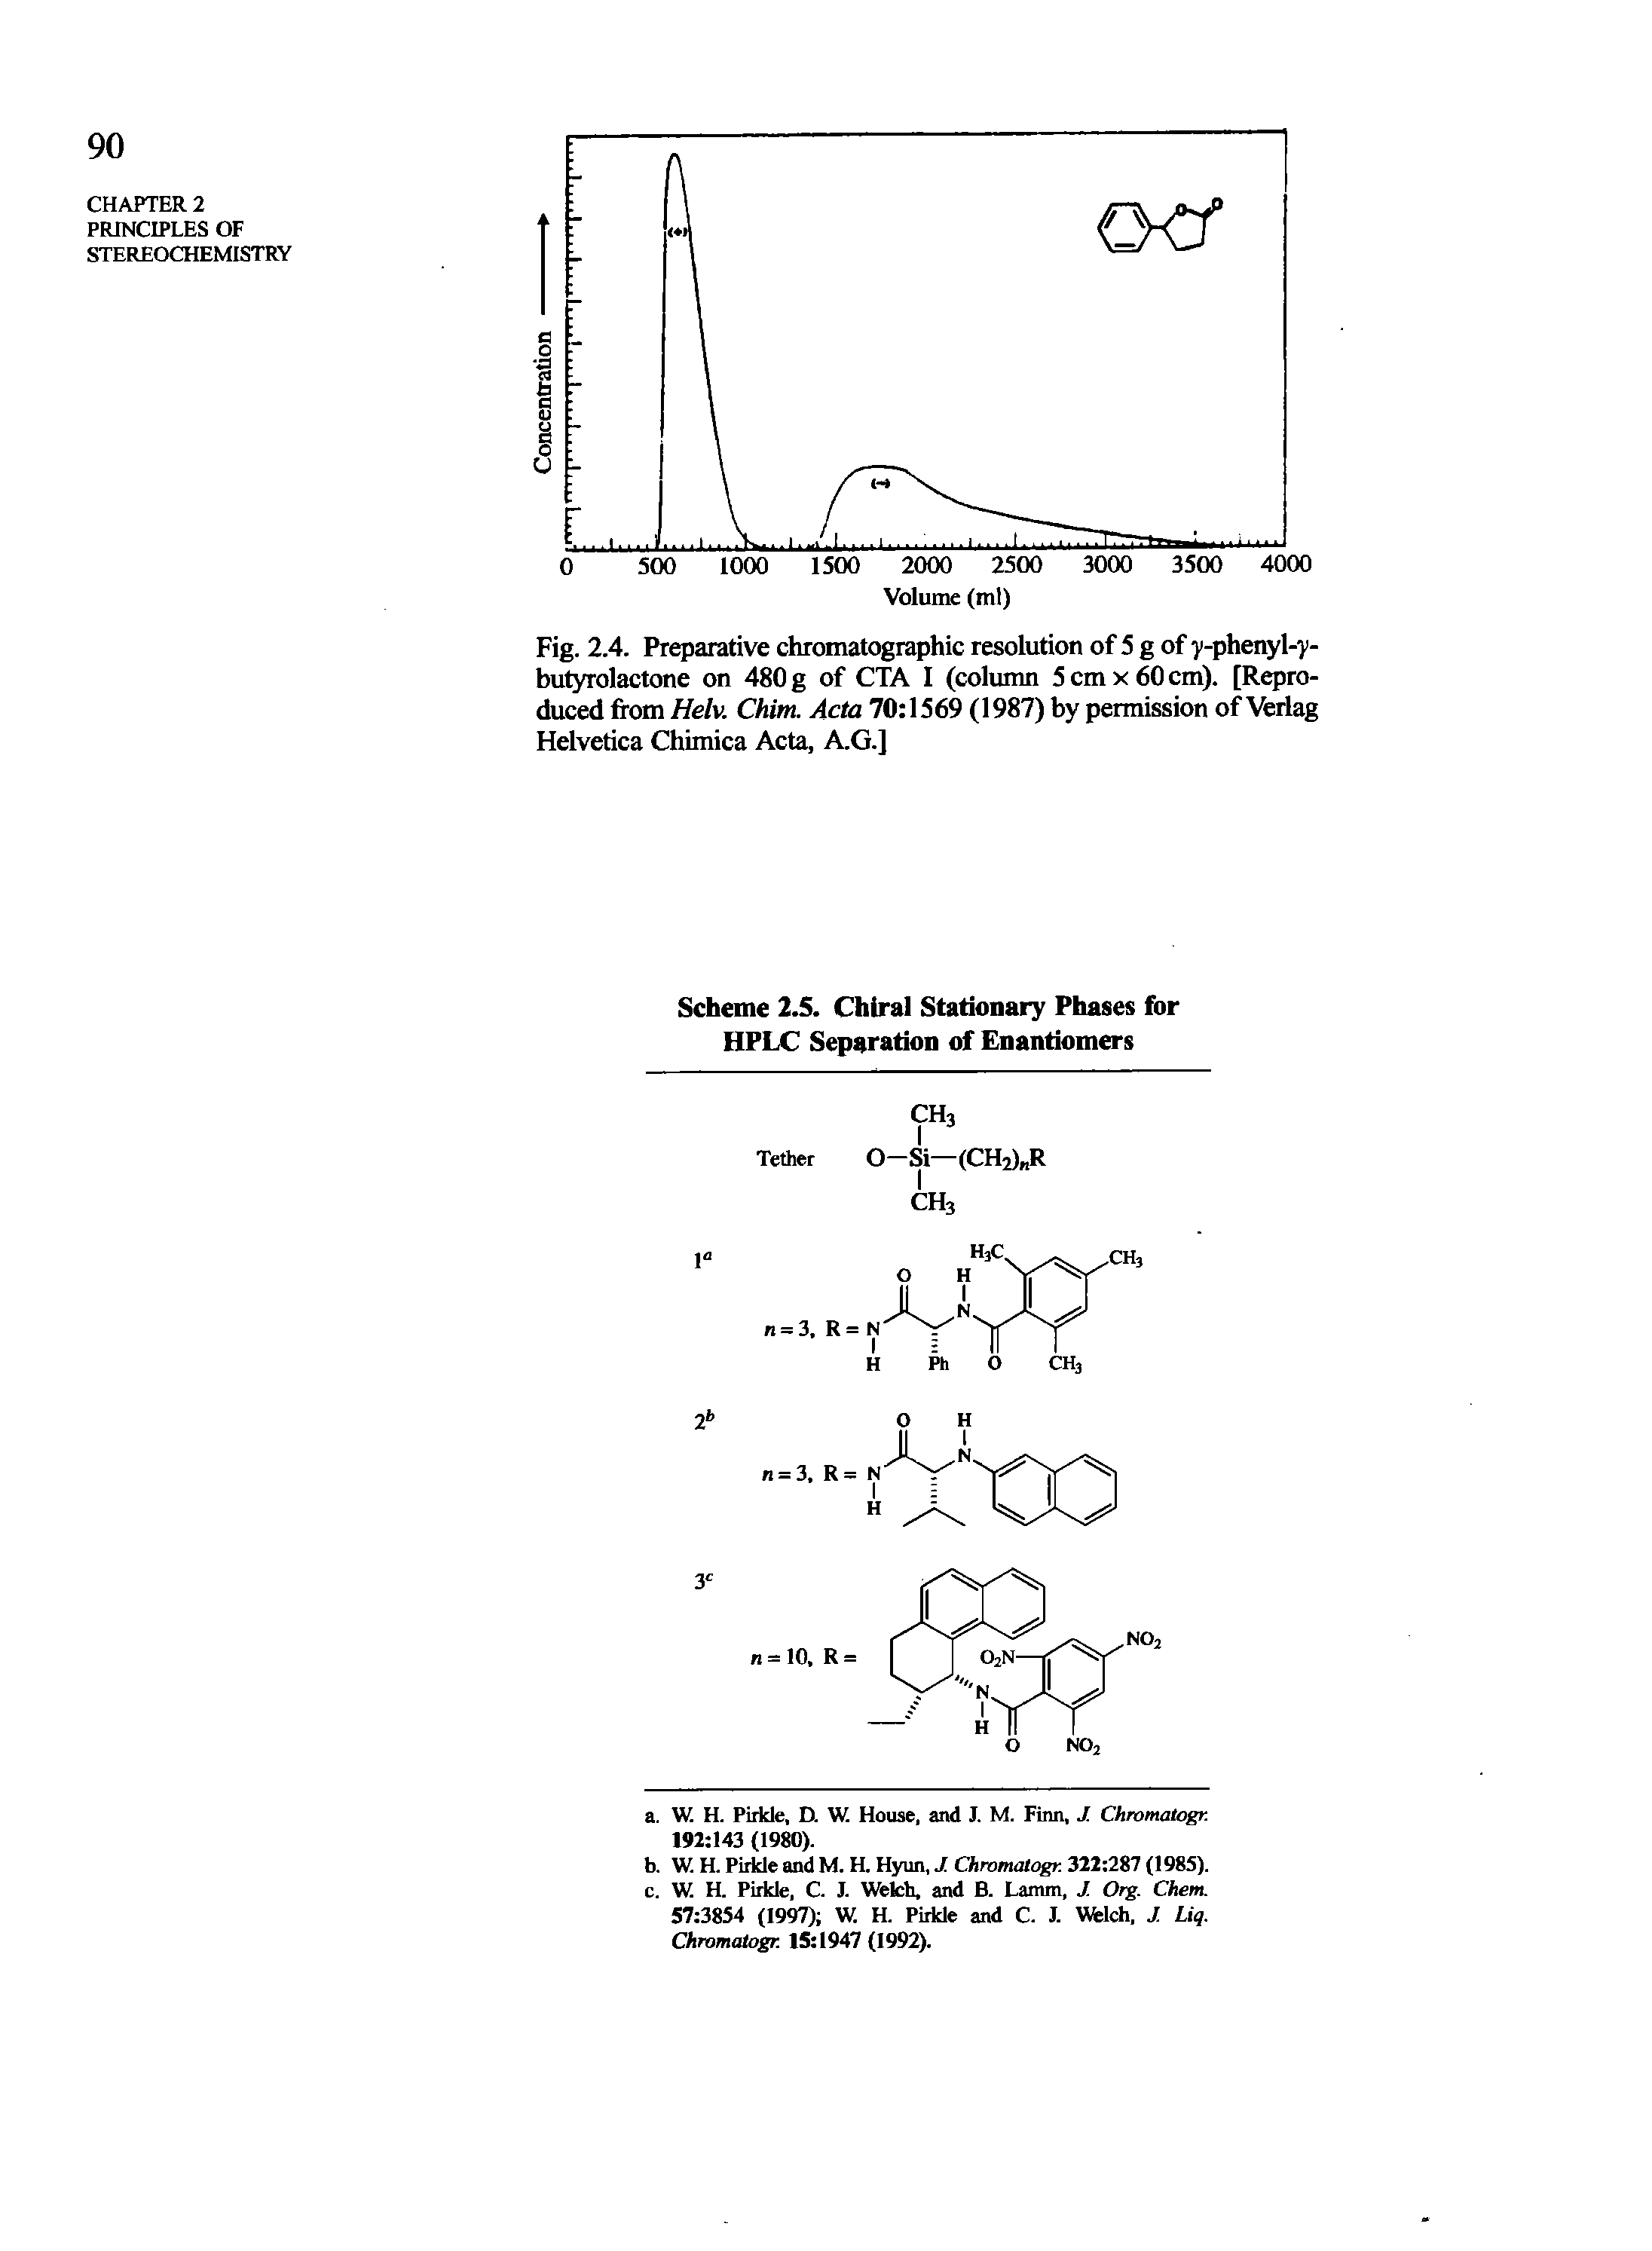 Fig. 2.4. Preparative chromatographic resolution of 5 g of )/-phenyl-)>-butyrolactone on 480 g of CTA I (column 5 cm x 60 cm). [Reproduced from Helv. Chim. Acta 70 1569 (1987) by permission of Verlag Helvetica Chimica Acta, A.G.]...